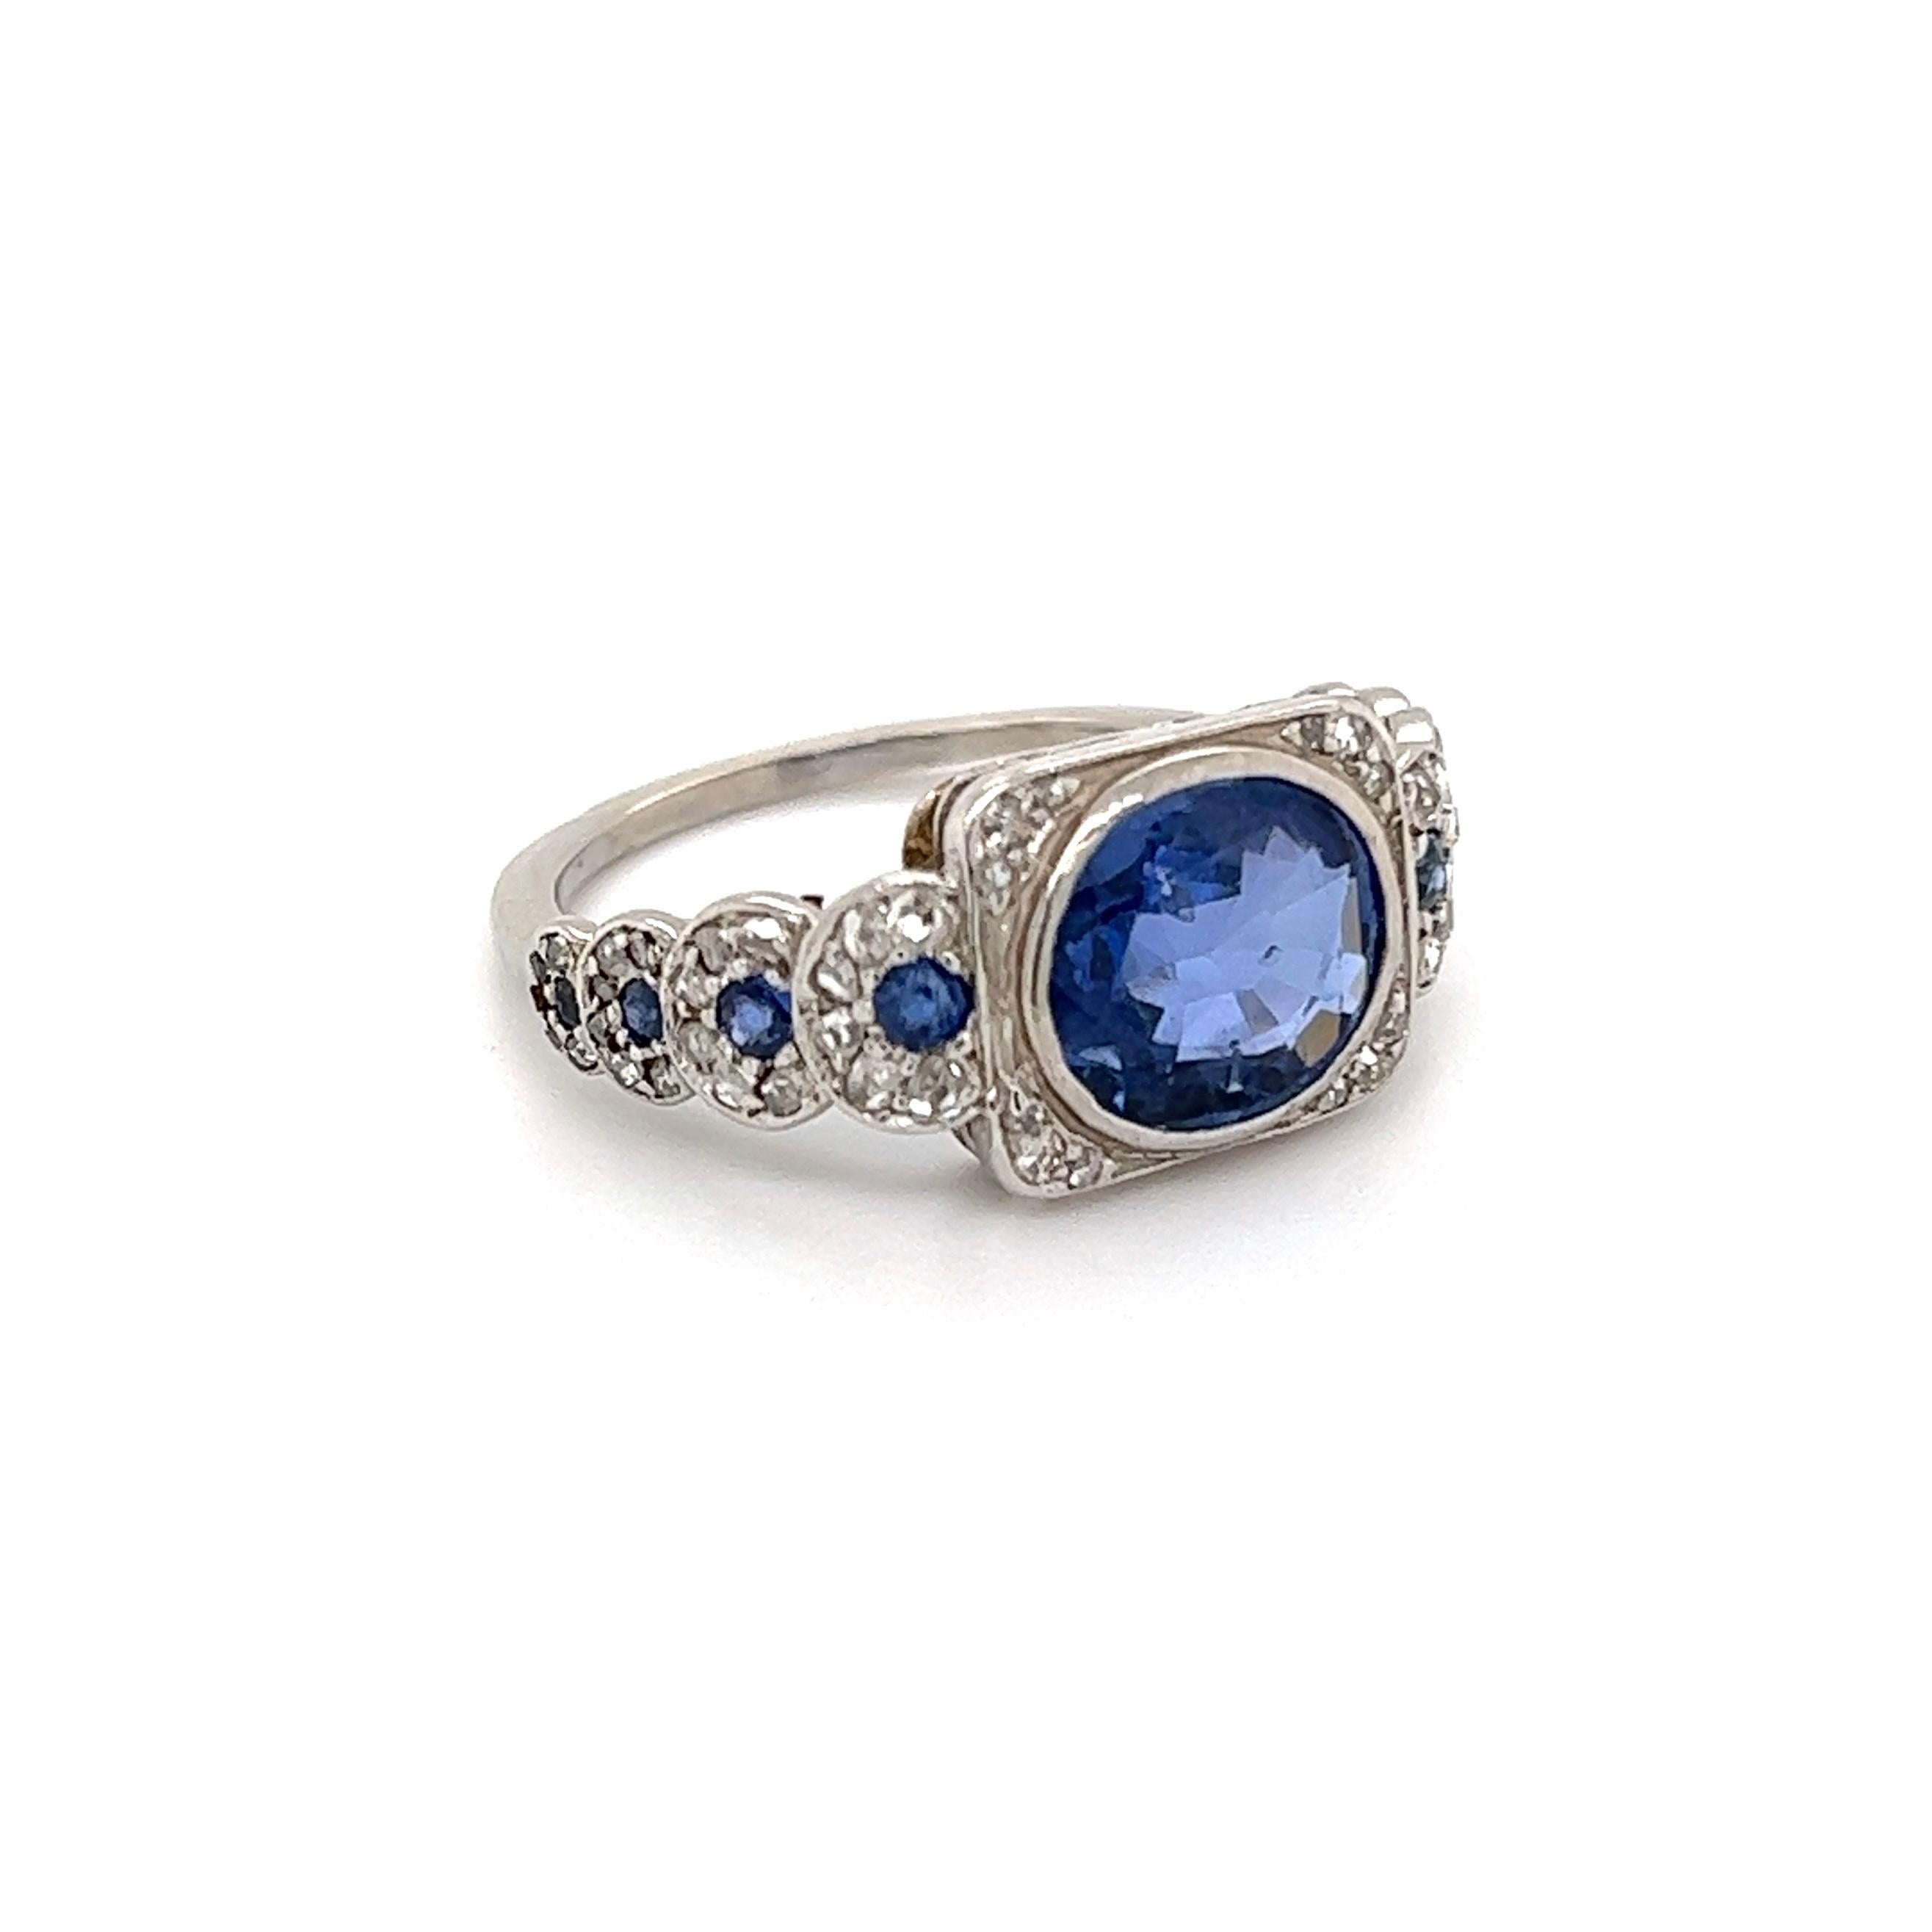 Simply Beautiful! Elegant and finely detailed Sapphire and Diamond Art Deco Revival Cocktail Ring. Center Hand set with a securely nestled 2 Carat Oval Sapphire accented by Diamonds, weighing approx. 0.65 total Carat weight and around the Diamonds,